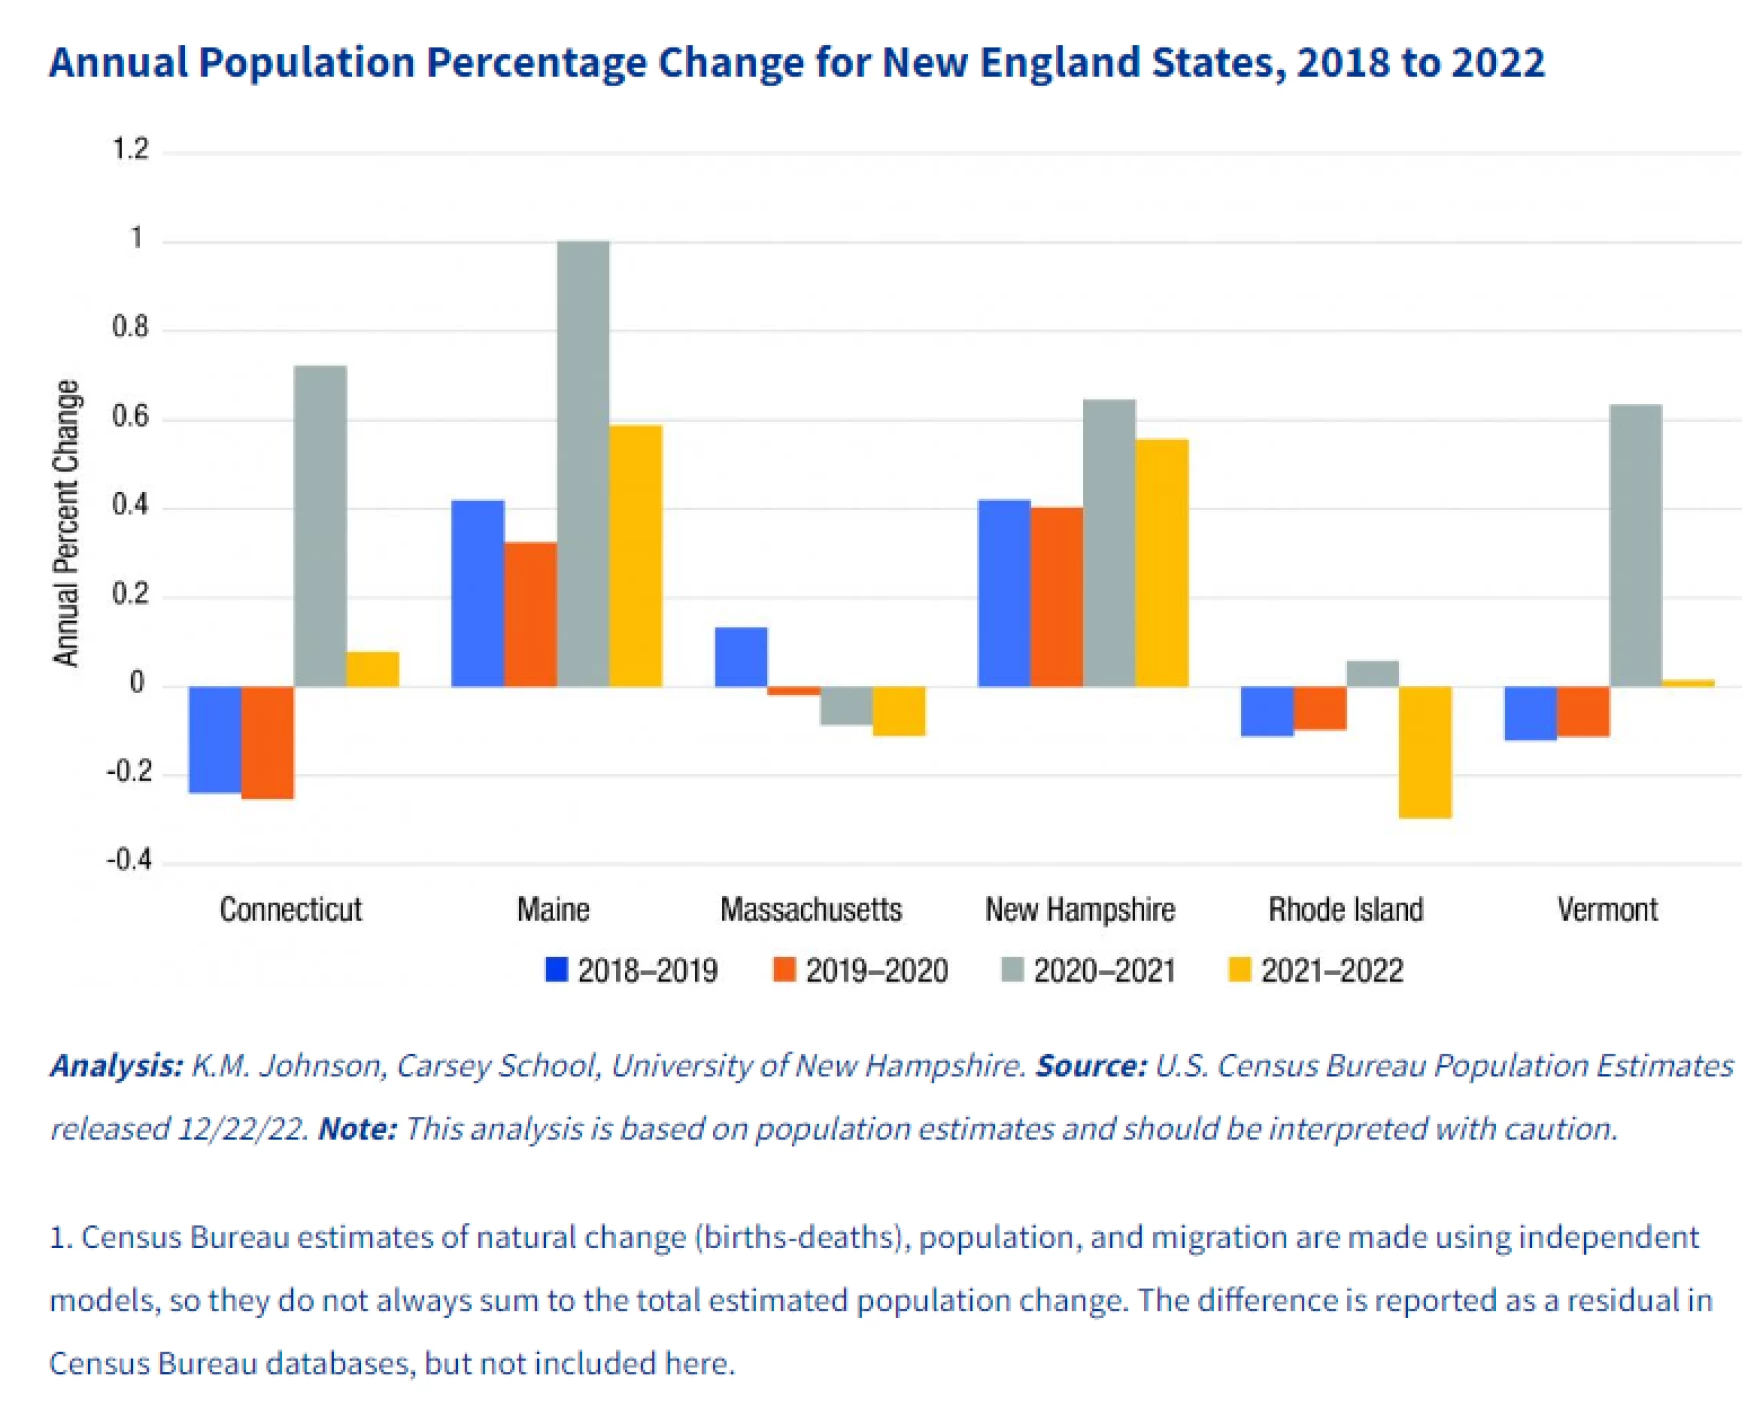 Moving on in, and keeping NH's population above water, Economy